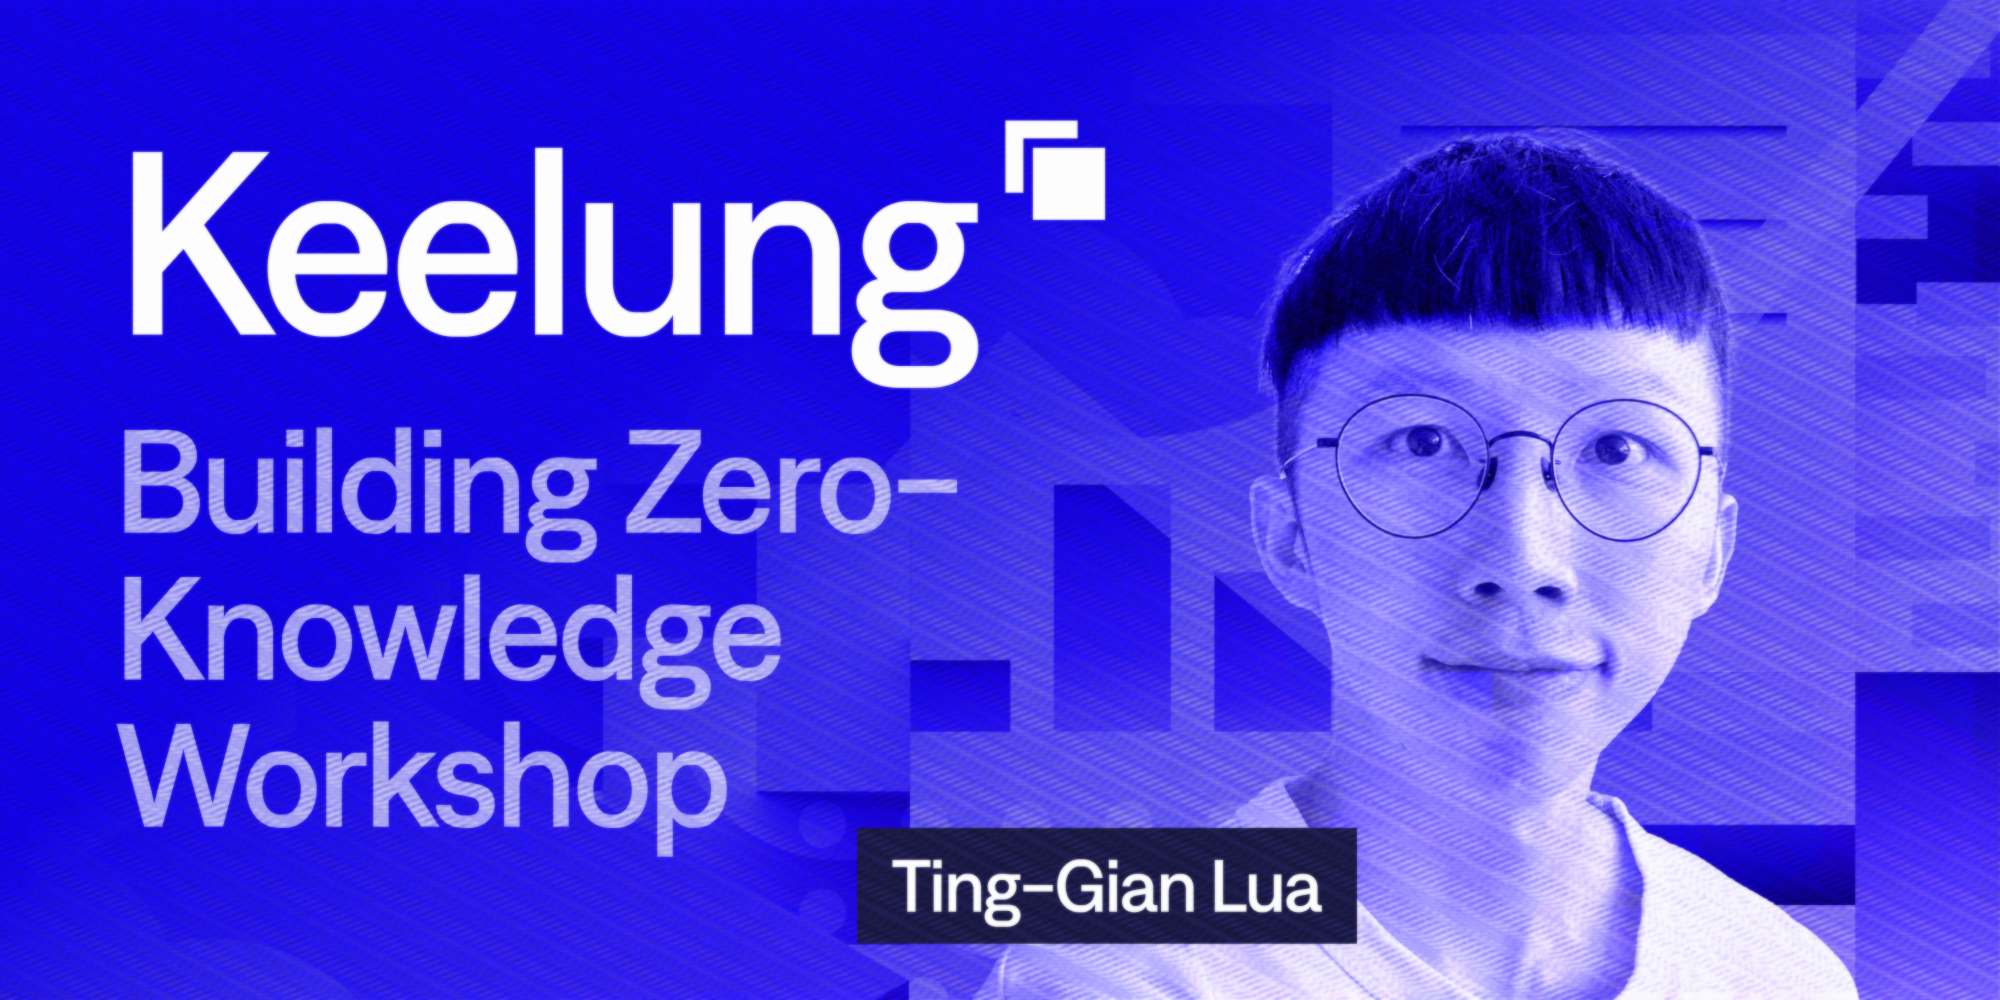 Building Zero-Knowledge With Keelung cover